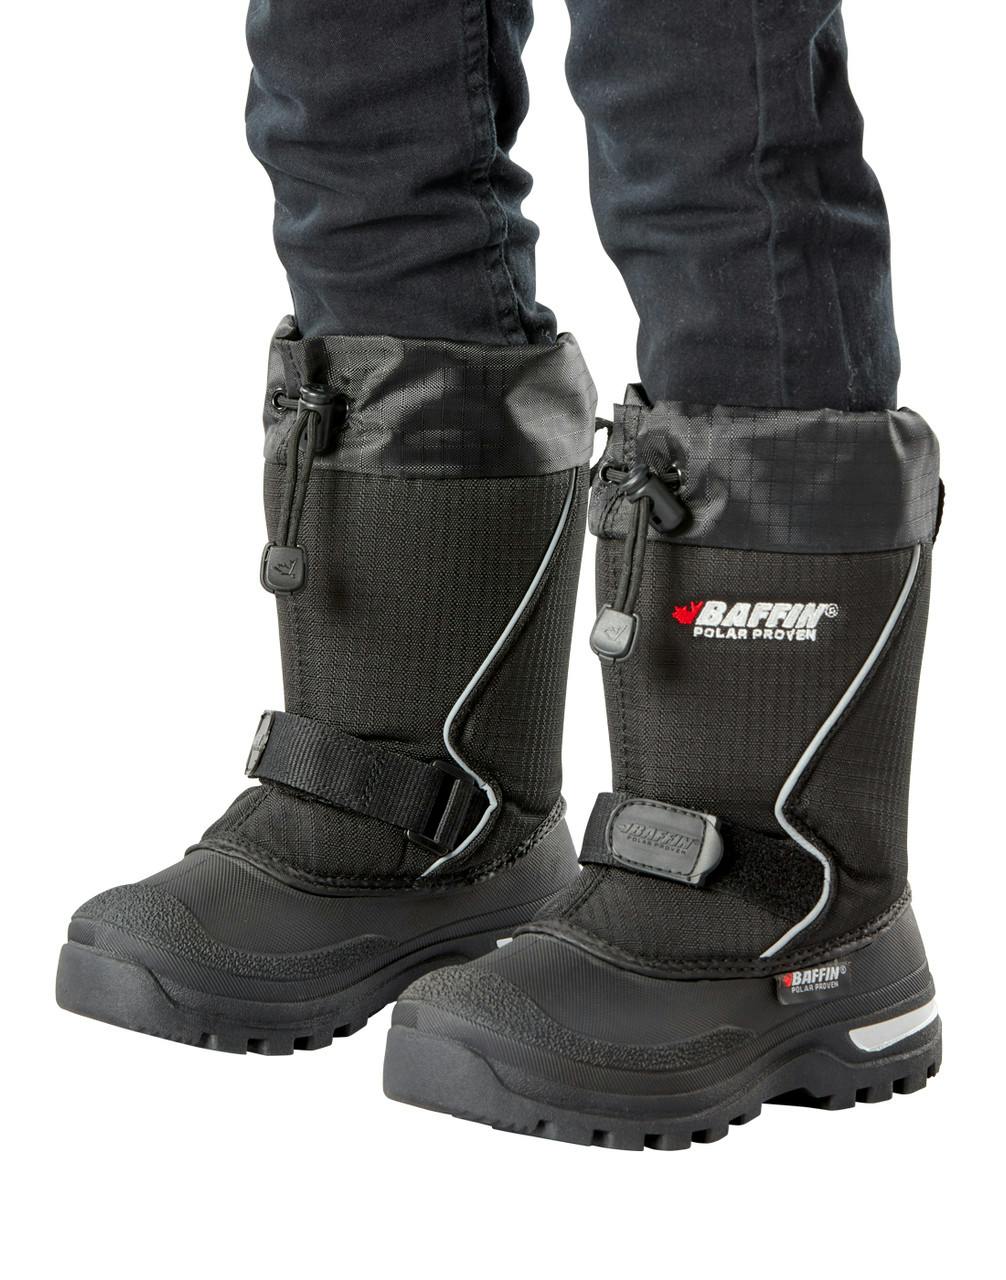 Mustang Winter Boots Black